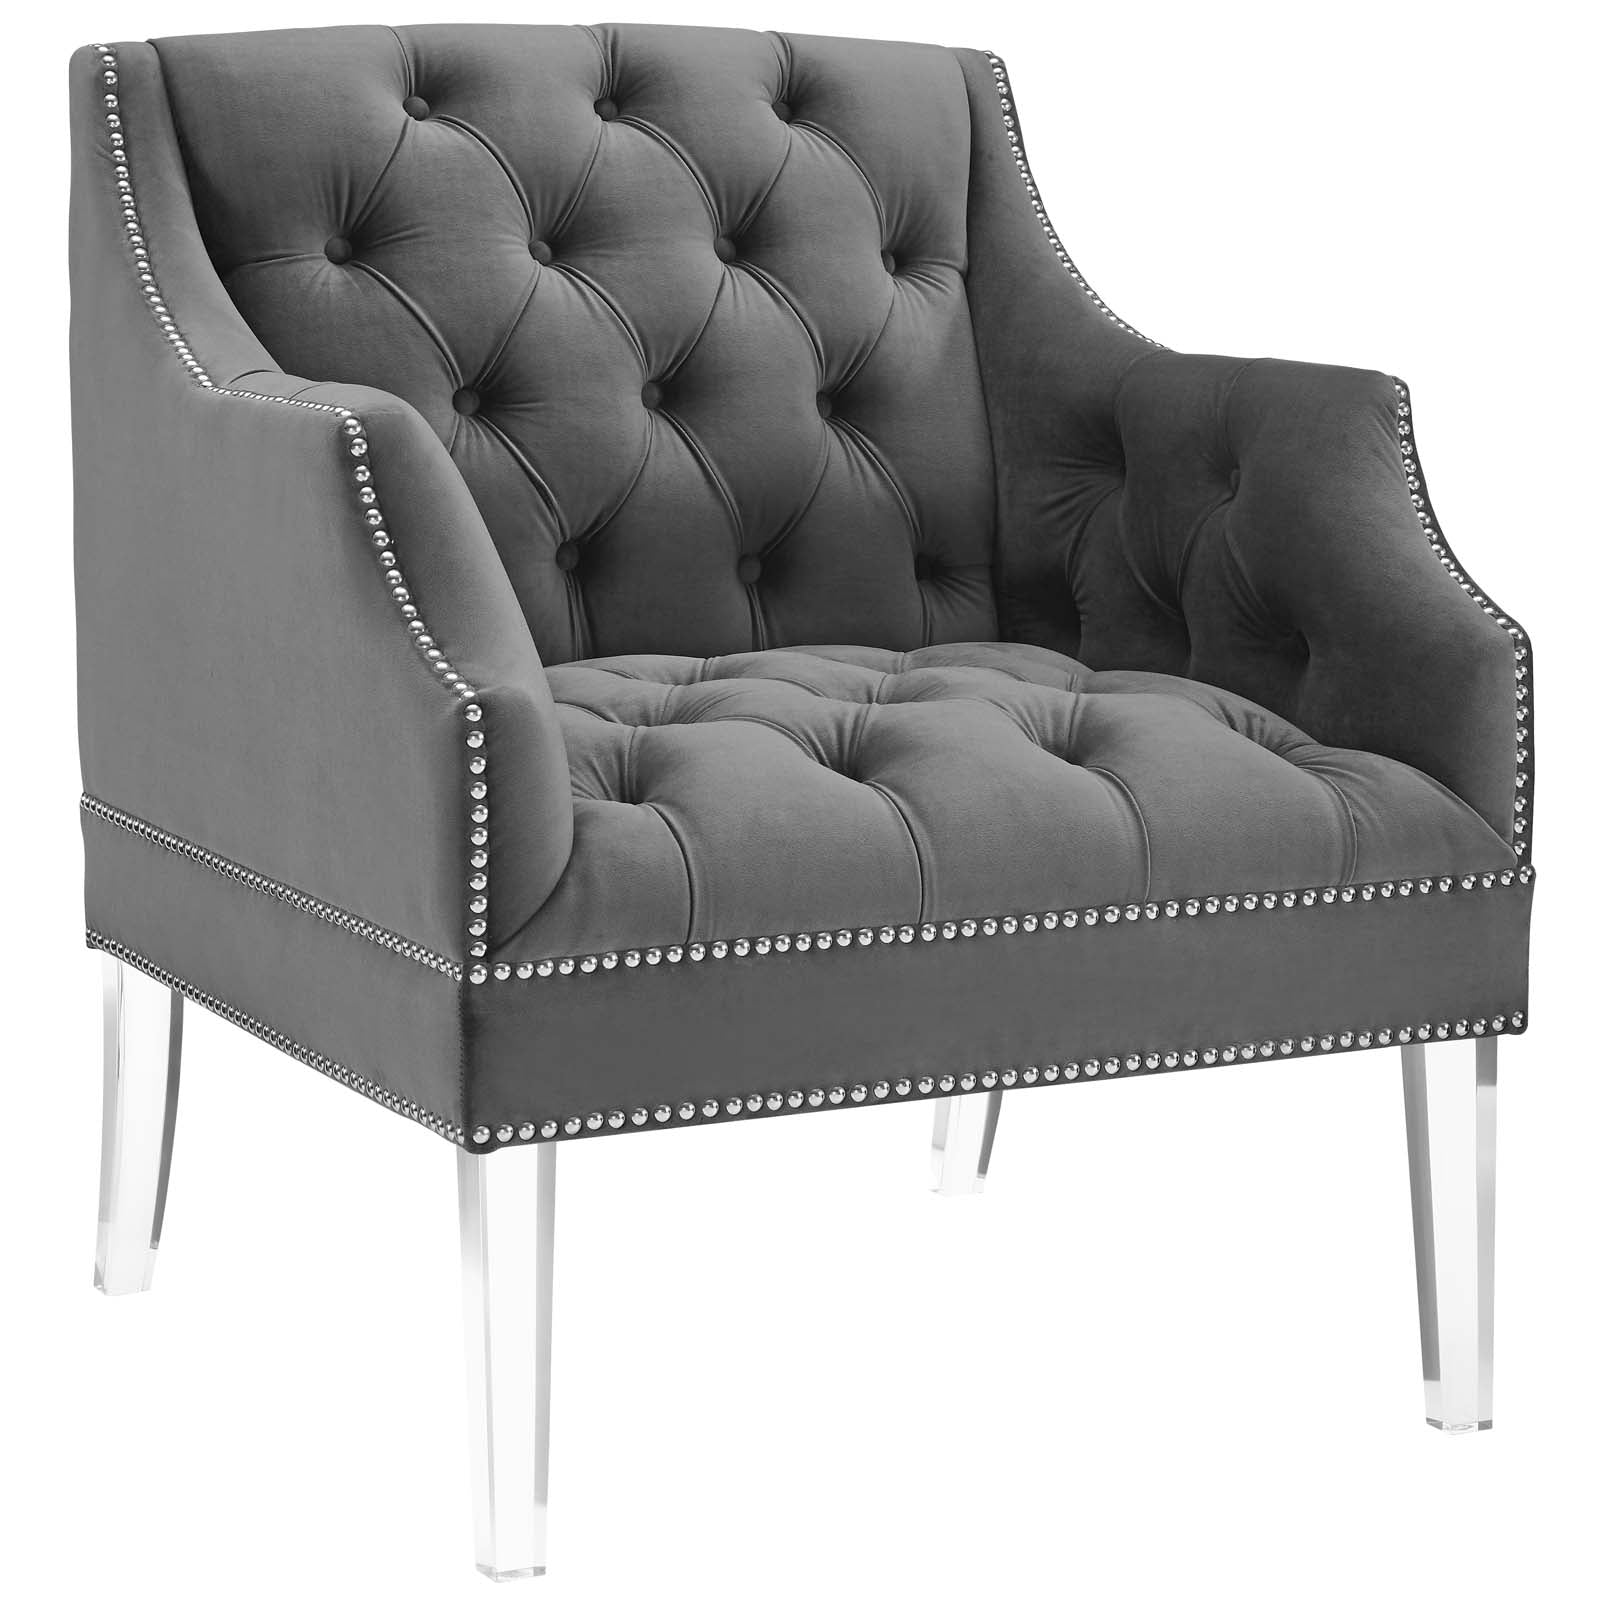 Proverbial Tufted Button Accent Performance Velvet Armchair - Modern Back Support Lounge Chair